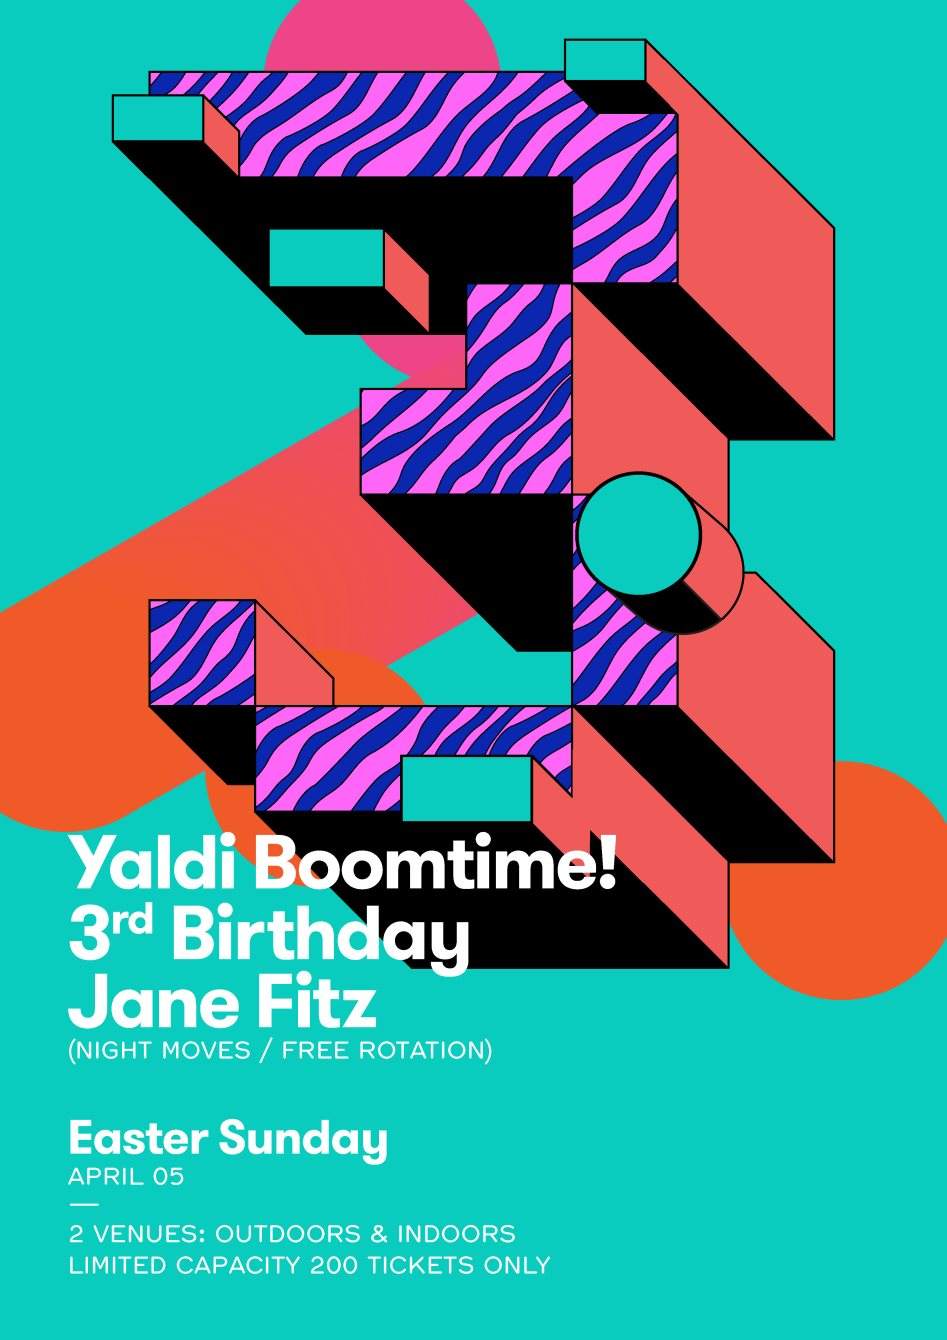 Yaldi Boomtime! Outdoor 3rd Birthday Party with Jane Fitz & Inkswel - Página frontal